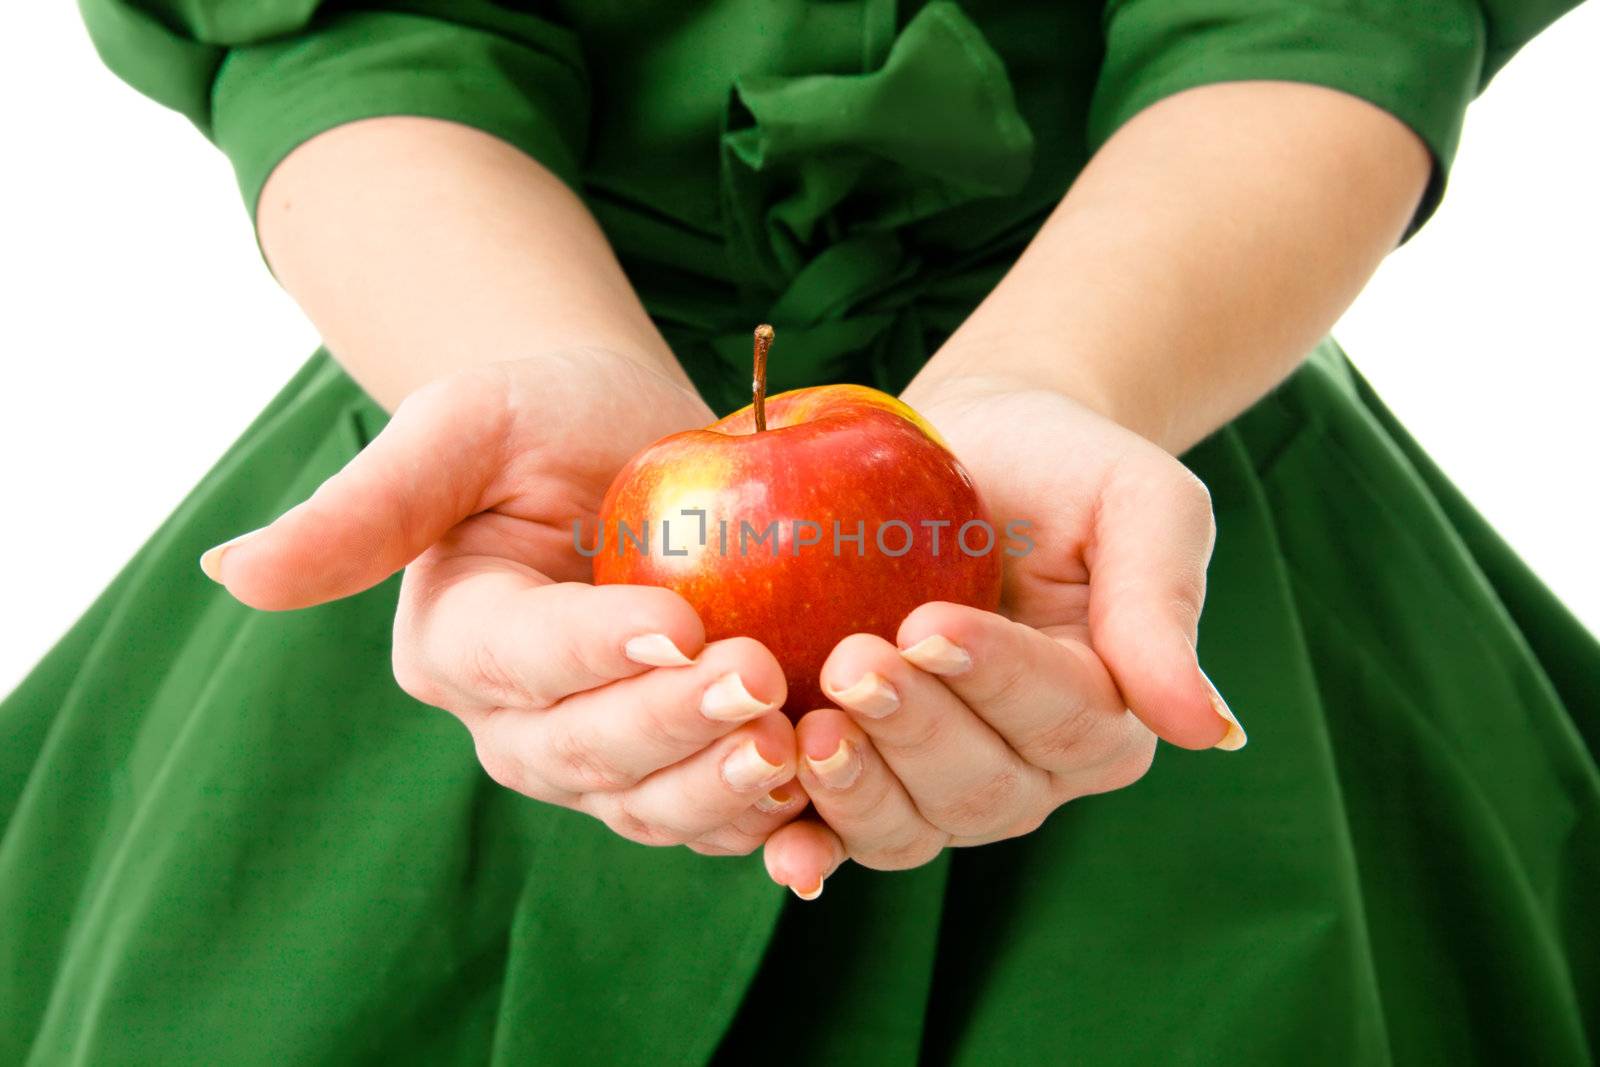 Woman's hands holding a fresh apple